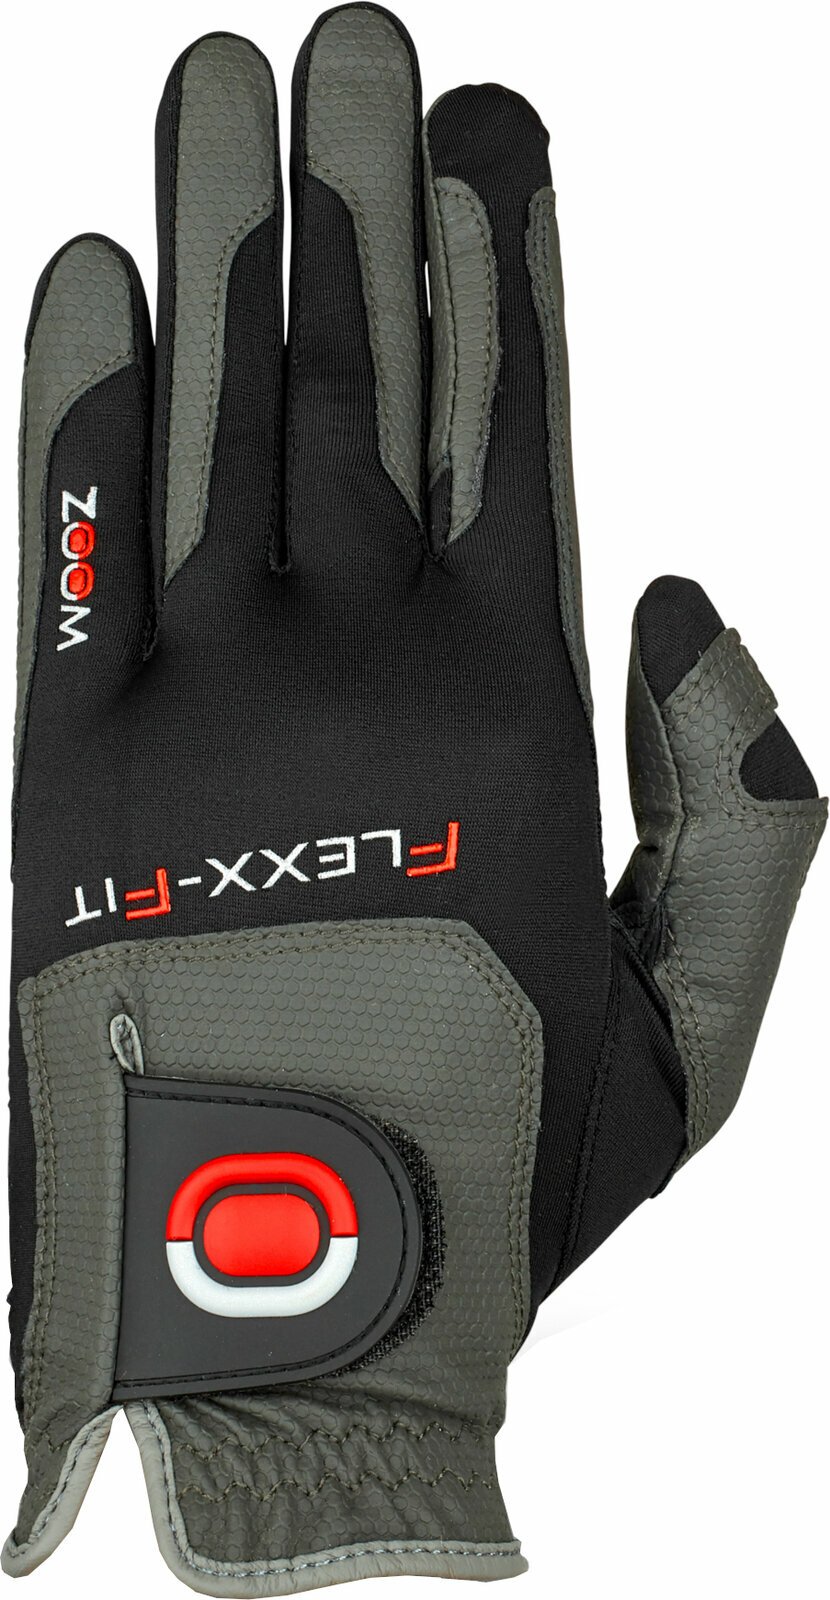 Handschuhe Zoom Gloves Weather Womens Golf Glove Charcoal/Black/Red LH